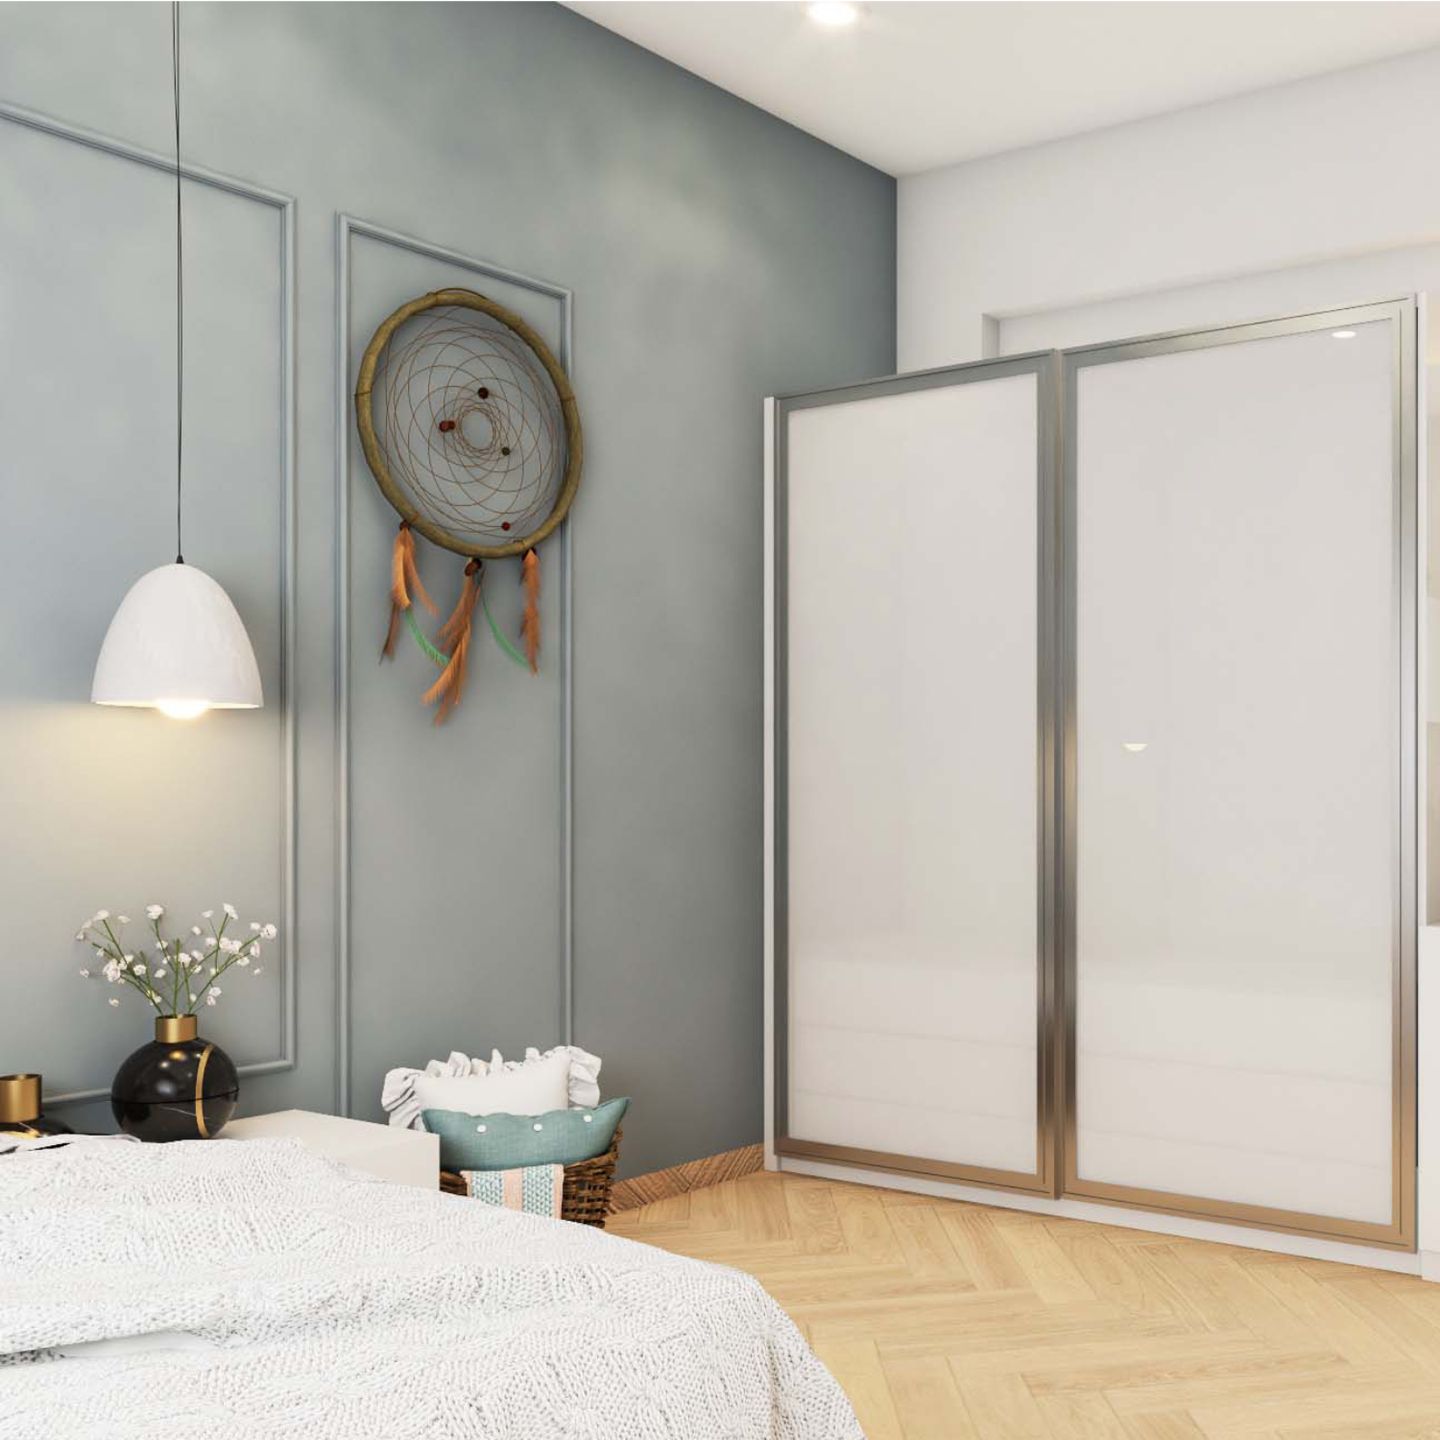 Light Grey Bedroom Wall Paint Design With Trims - Livspace